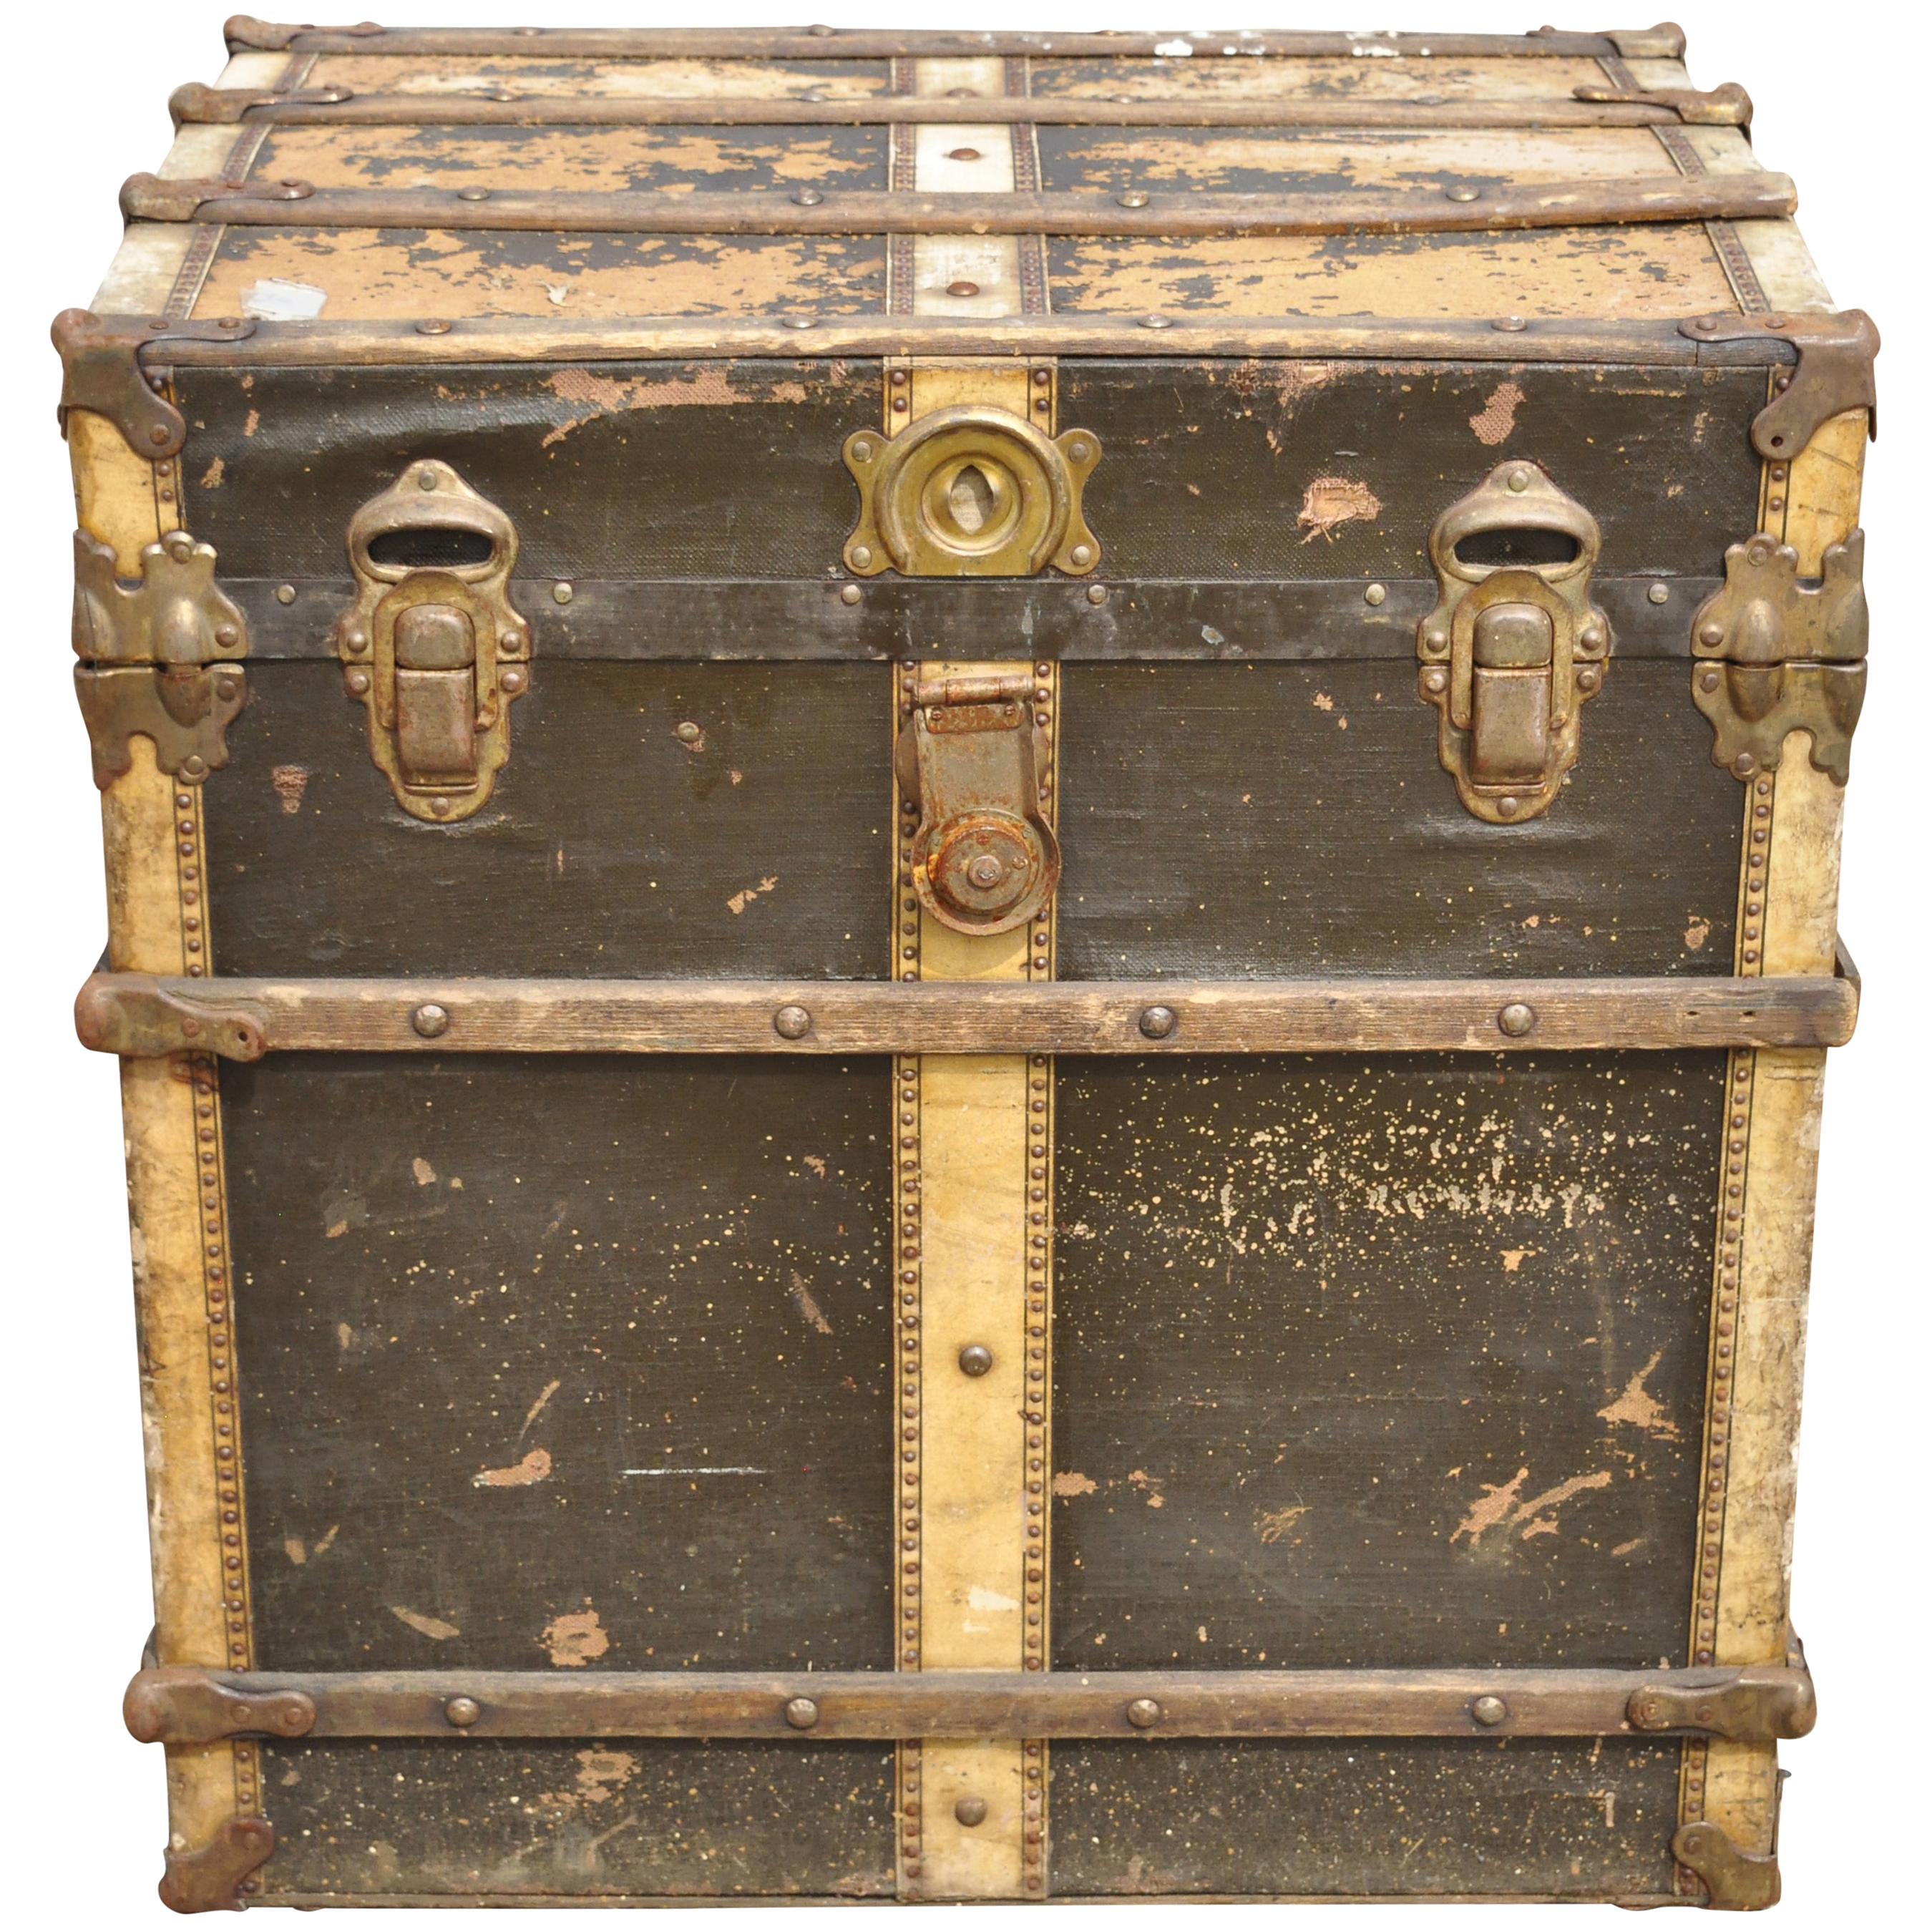 Arts & Crafts Mission Victorian Storage Trunk Chest with Distressed Finish